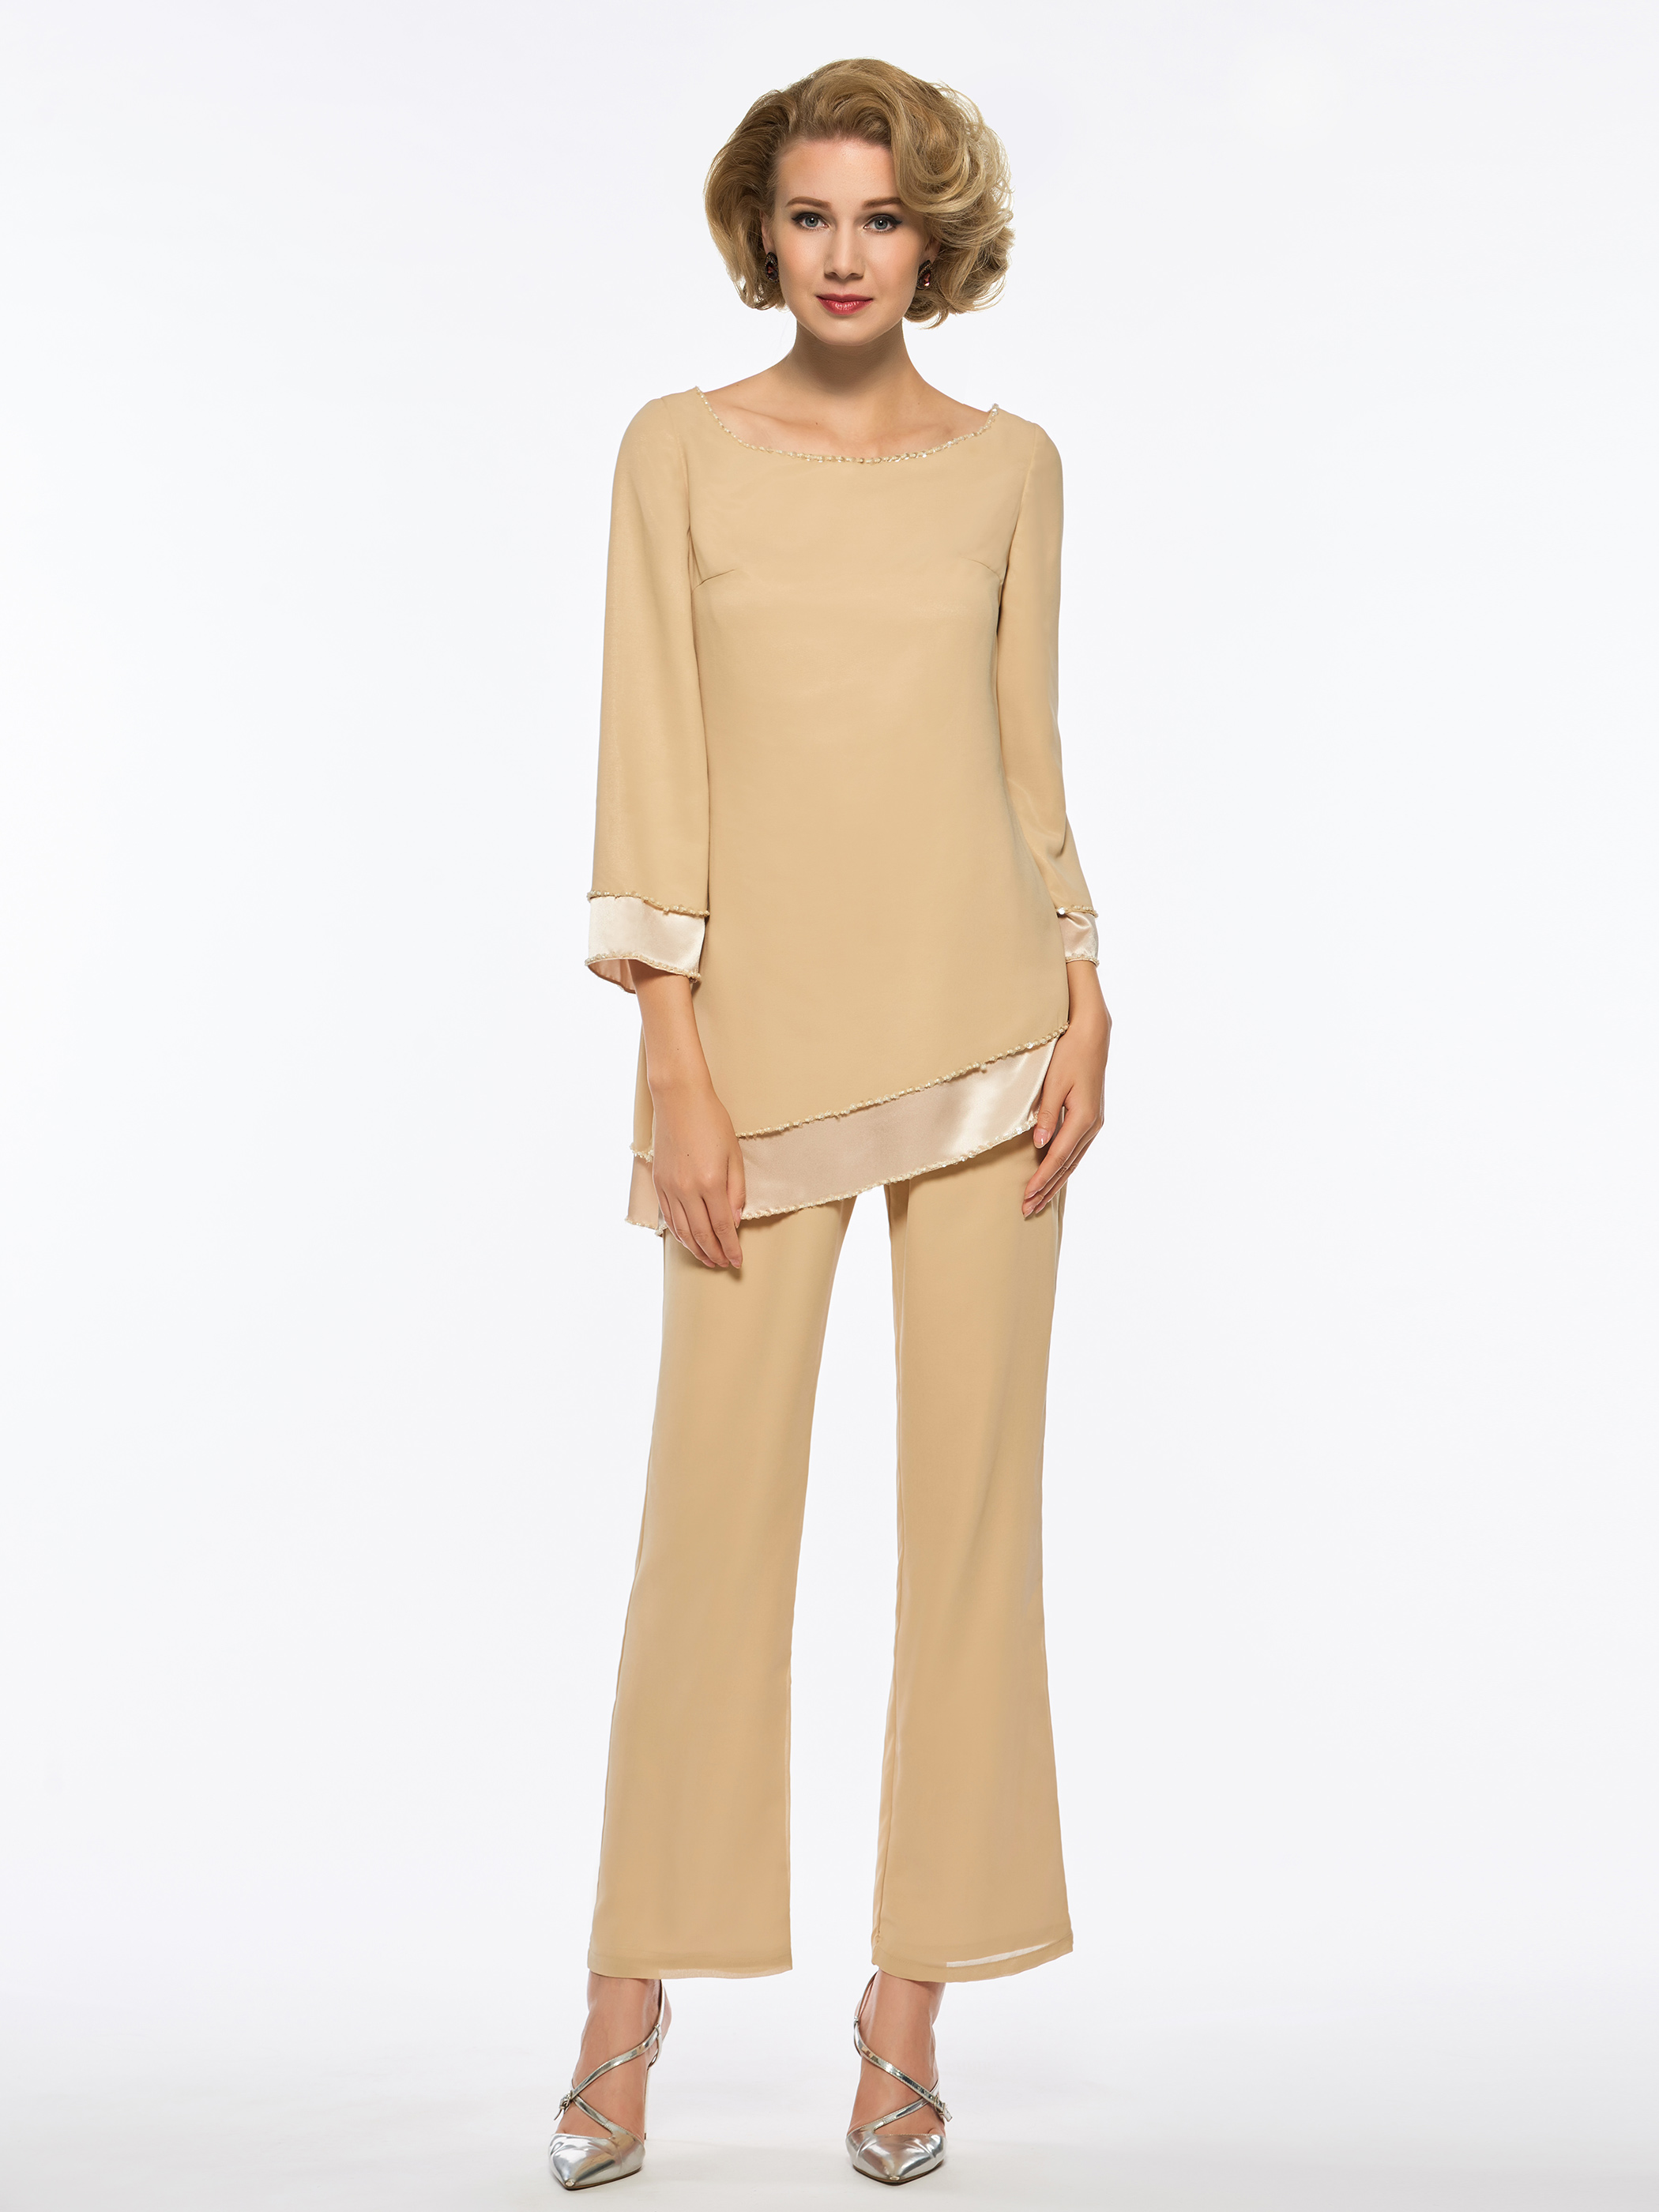 Ericdress 2 Pieces Long Sleeves Mother Of The Bride Pantsuits